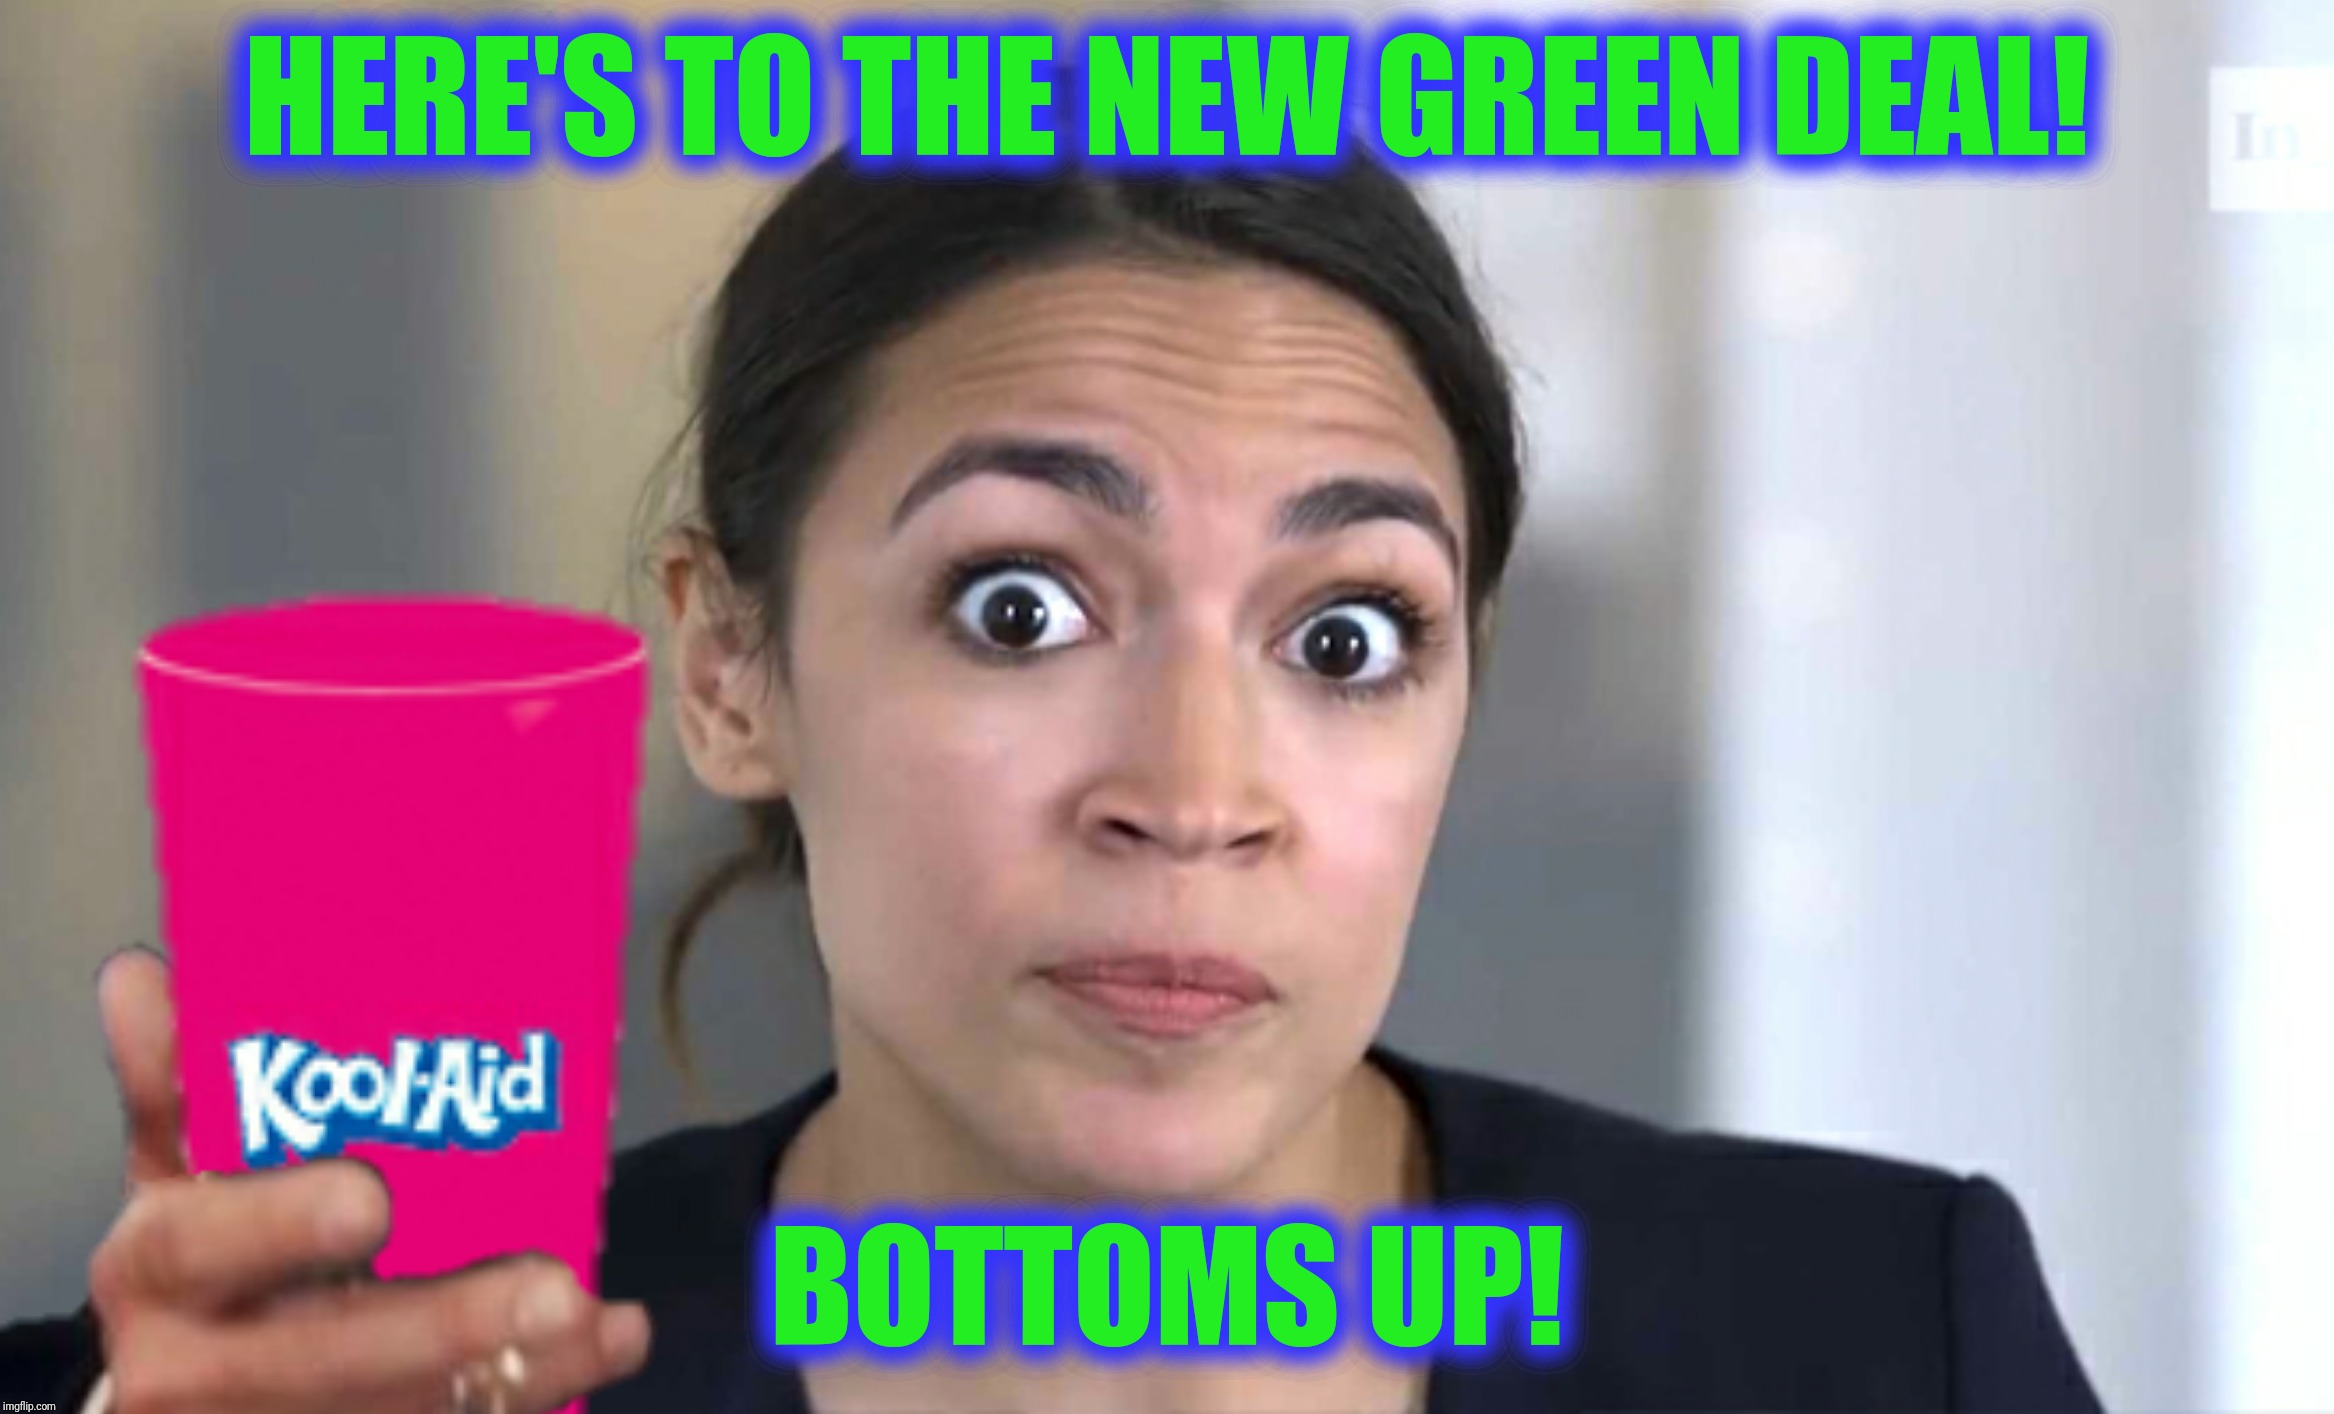 The face you make when you're unable or unwilling to think | HERE'S TO THE NEW GREEN DEAL! BOTTOMS UP! | image tagged in new green deal,alexandria ocasio-cortez,drink the kool-aid,cheers | made w/ Imgflip meme maker